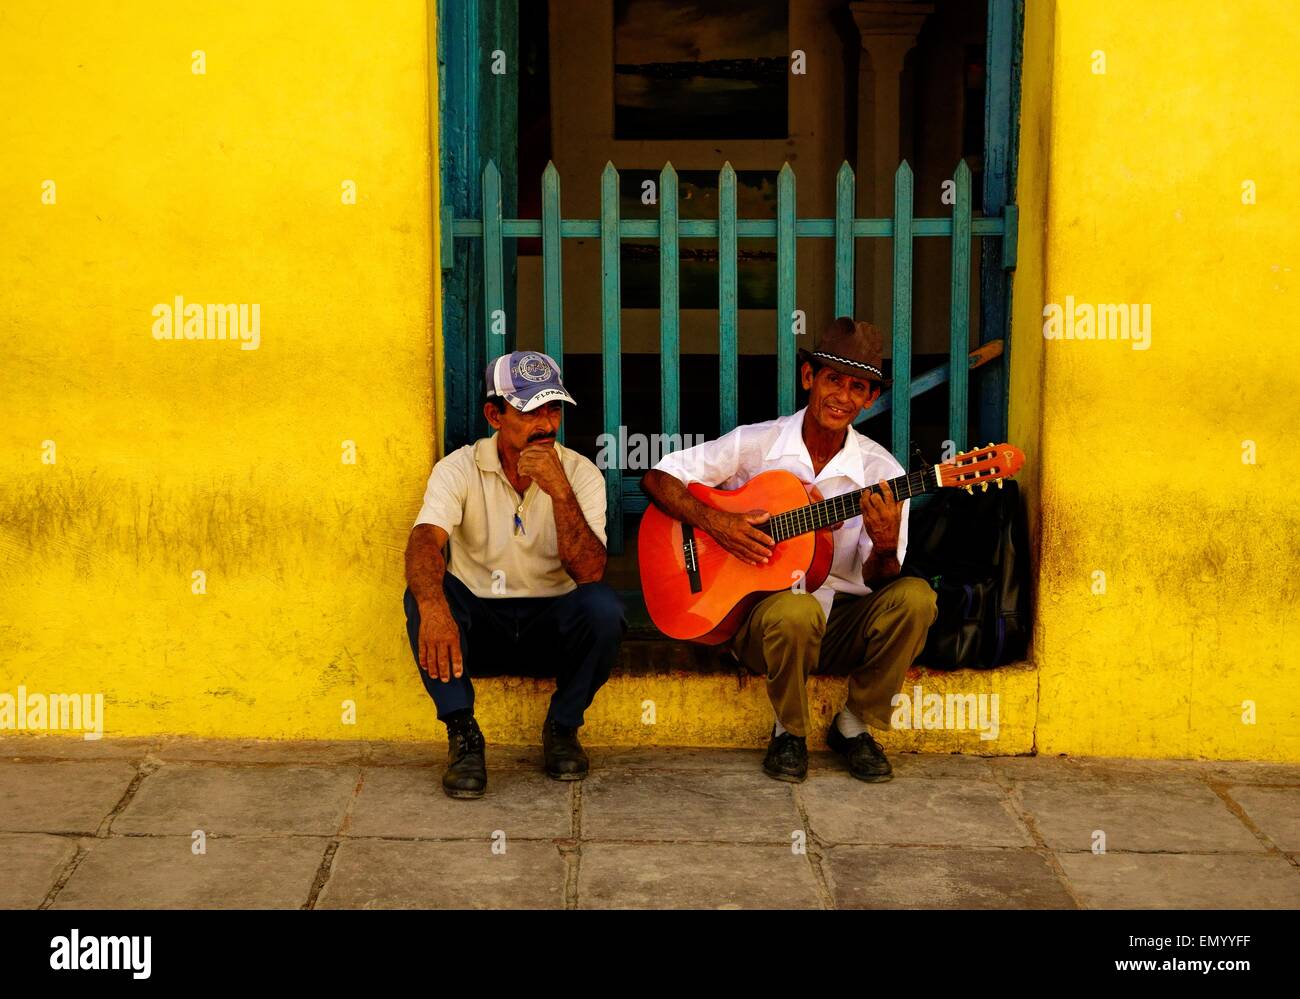 Busker and a man in the streets of Trinidad, Cuba on Christmas Eve 2013. Stock Photo